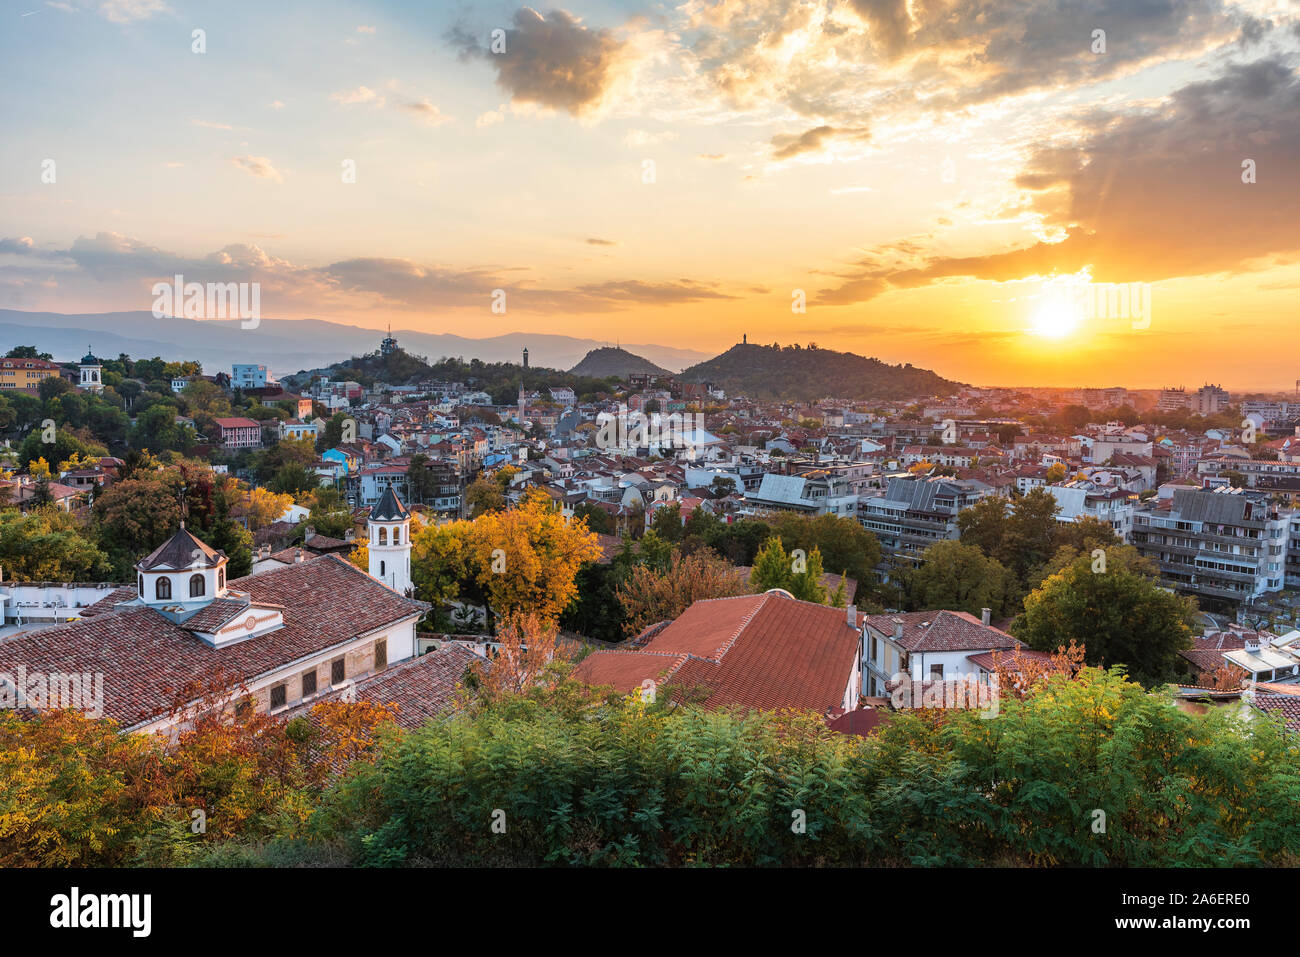 Autumn sunset over Plovdiv city, Bulgaria. European capital of culture 2019 and the oldest living city in Europe. Photo from one of the hills Stock Photo